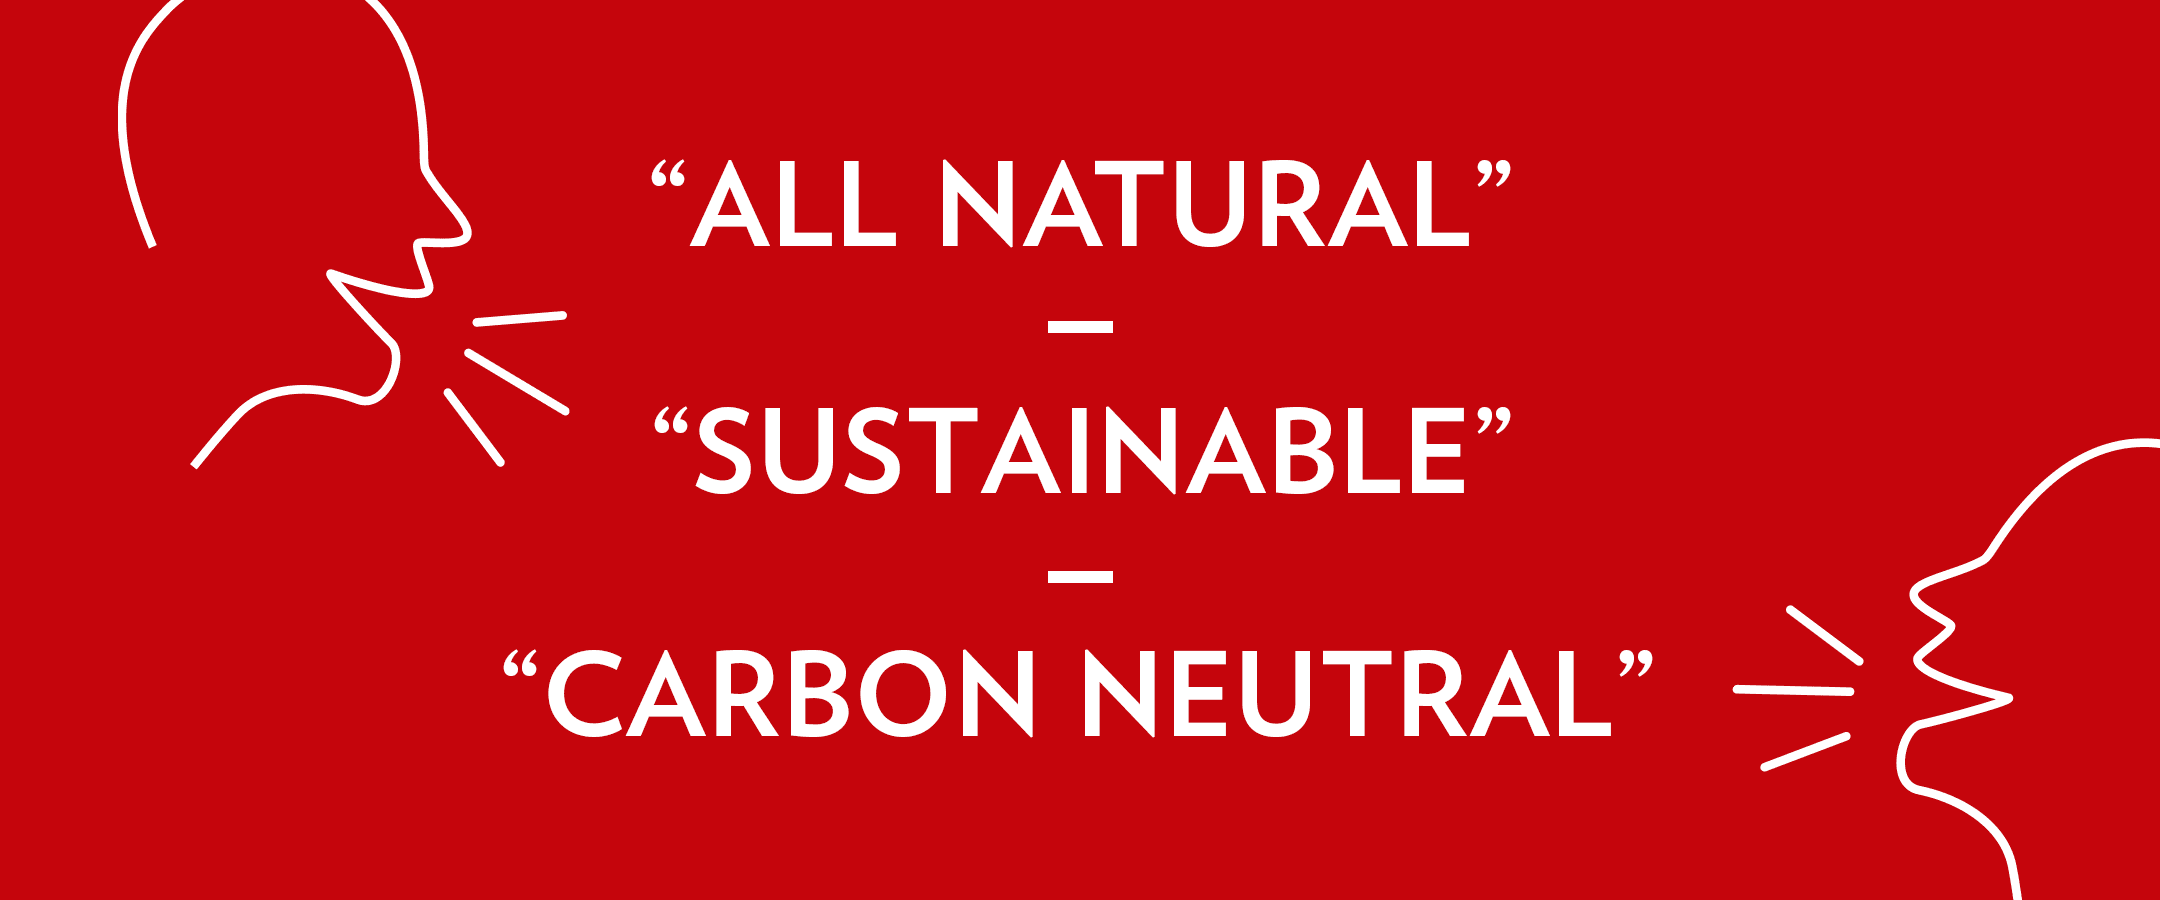 White text against red background that reads "All natural," "sustainable," and "carbon neutral." There are line illustrations of two heads saying these phrases.